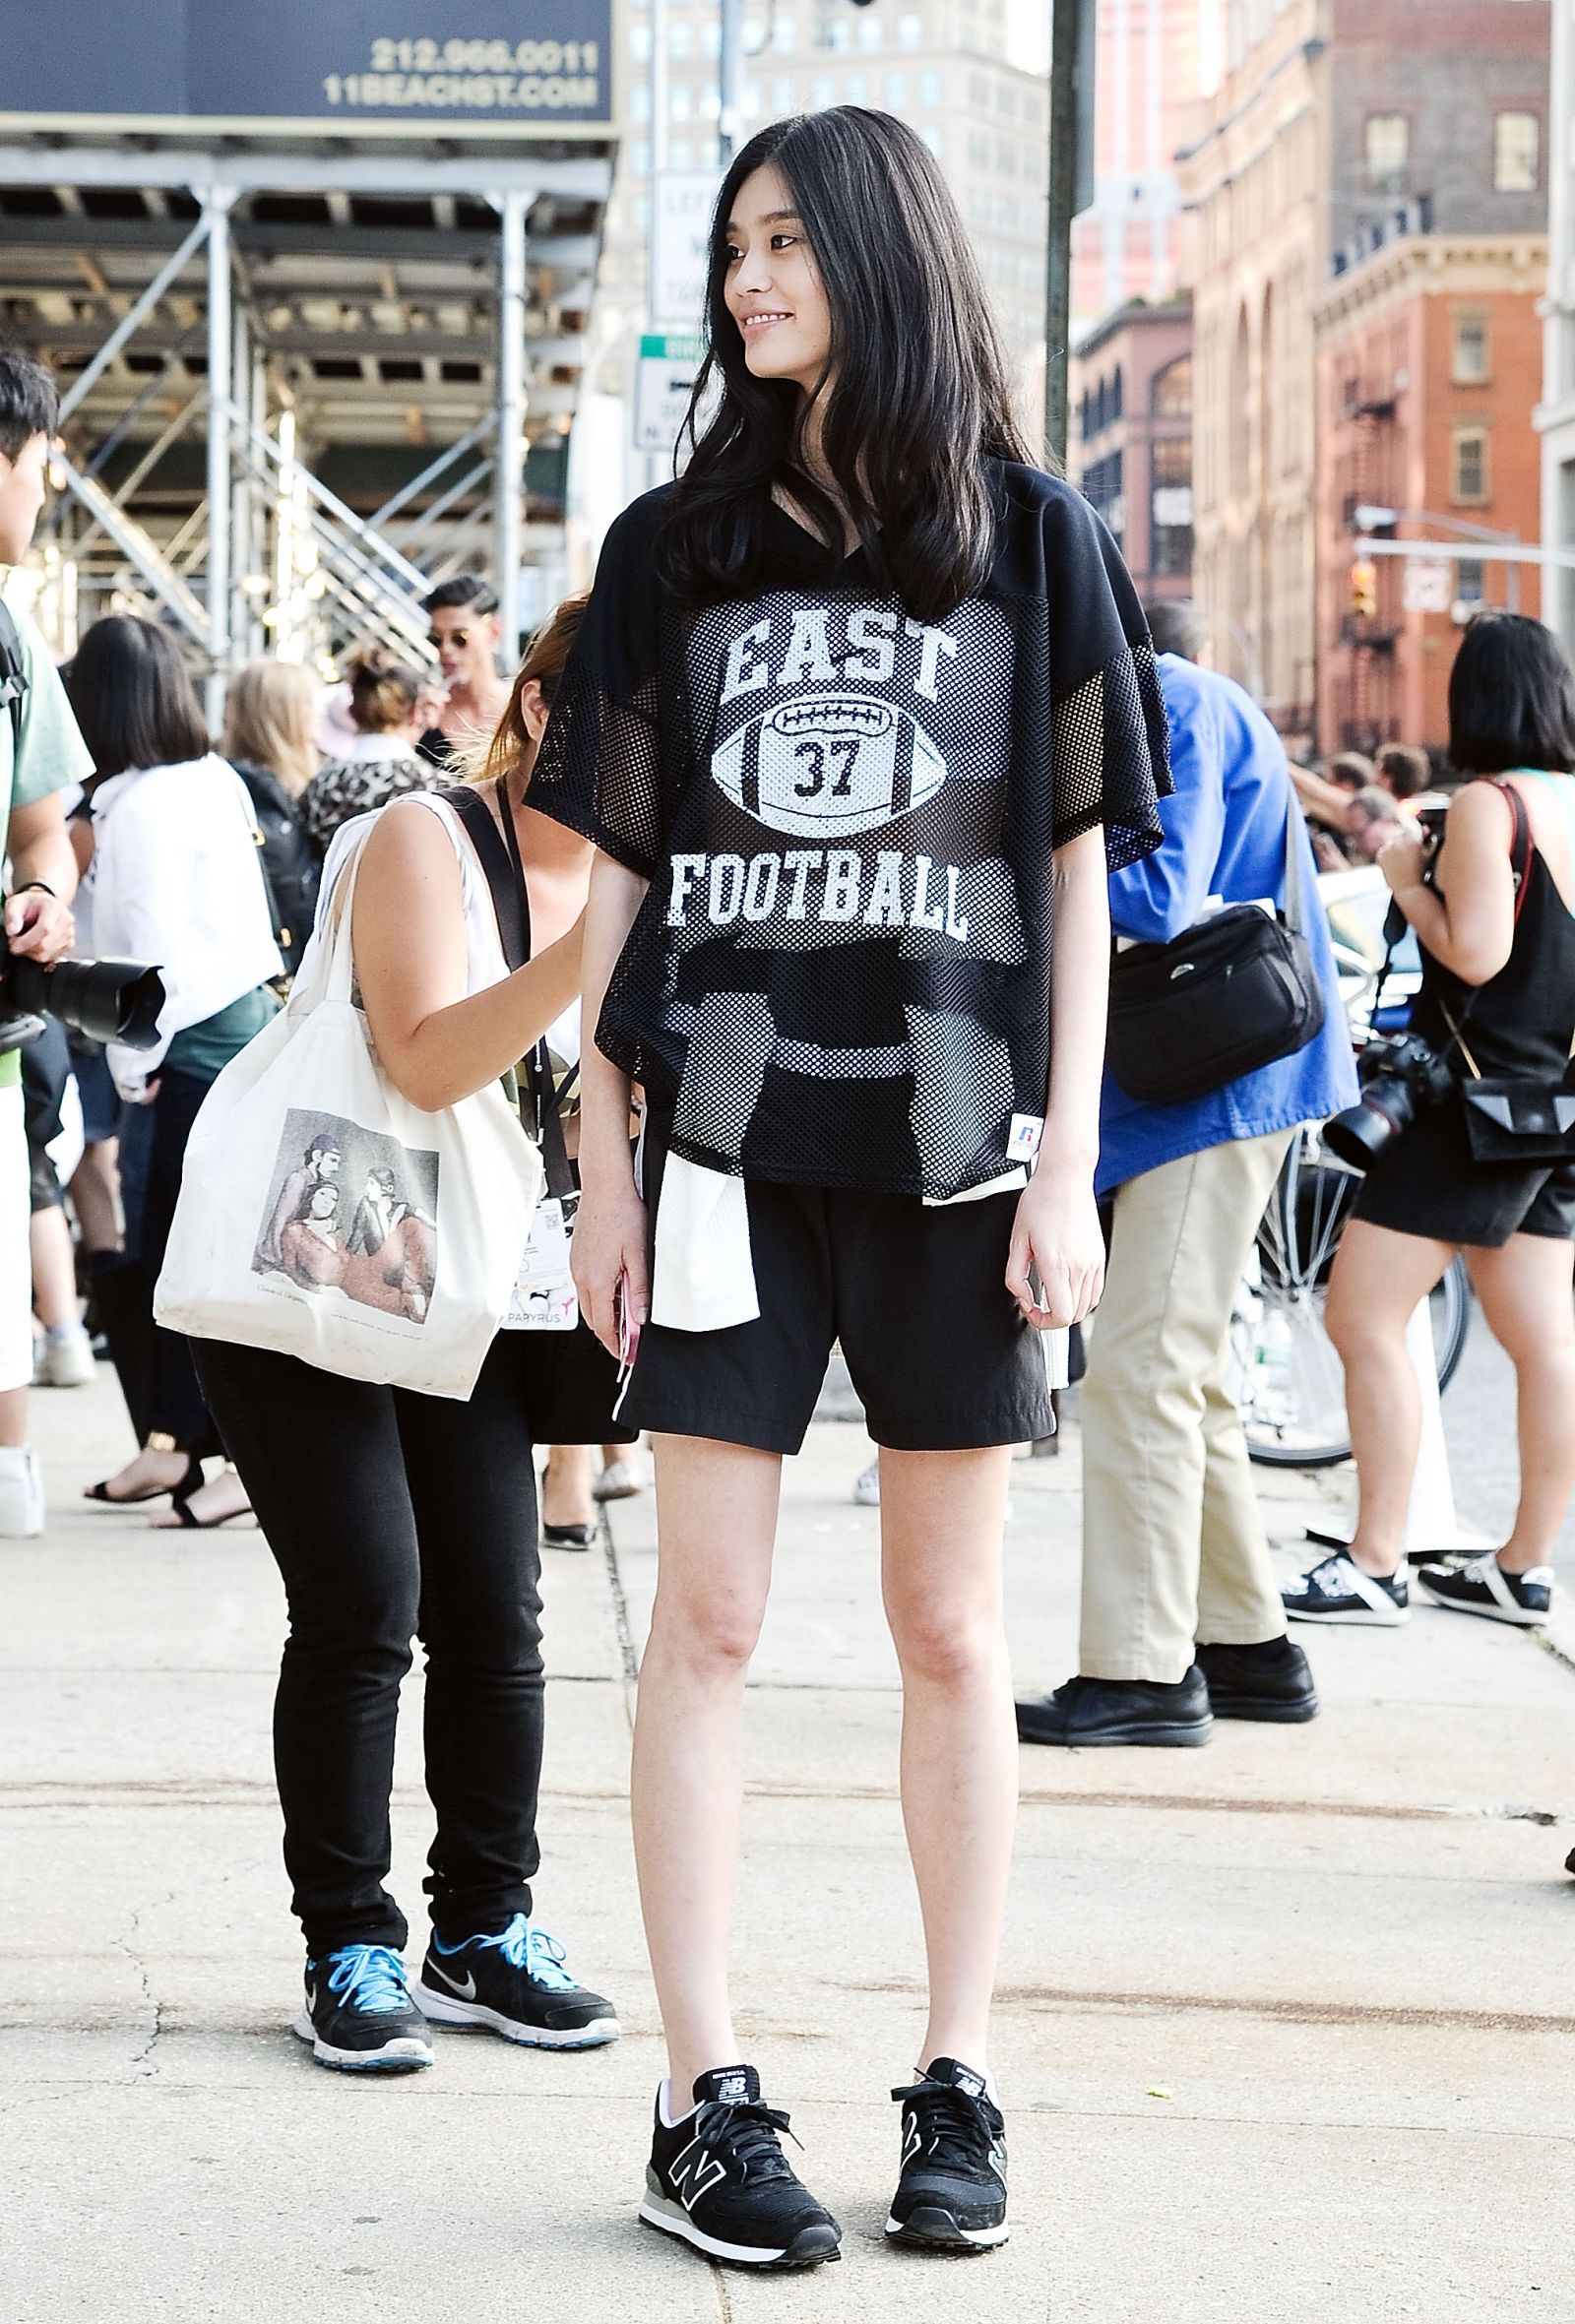 girl football jersey outfit